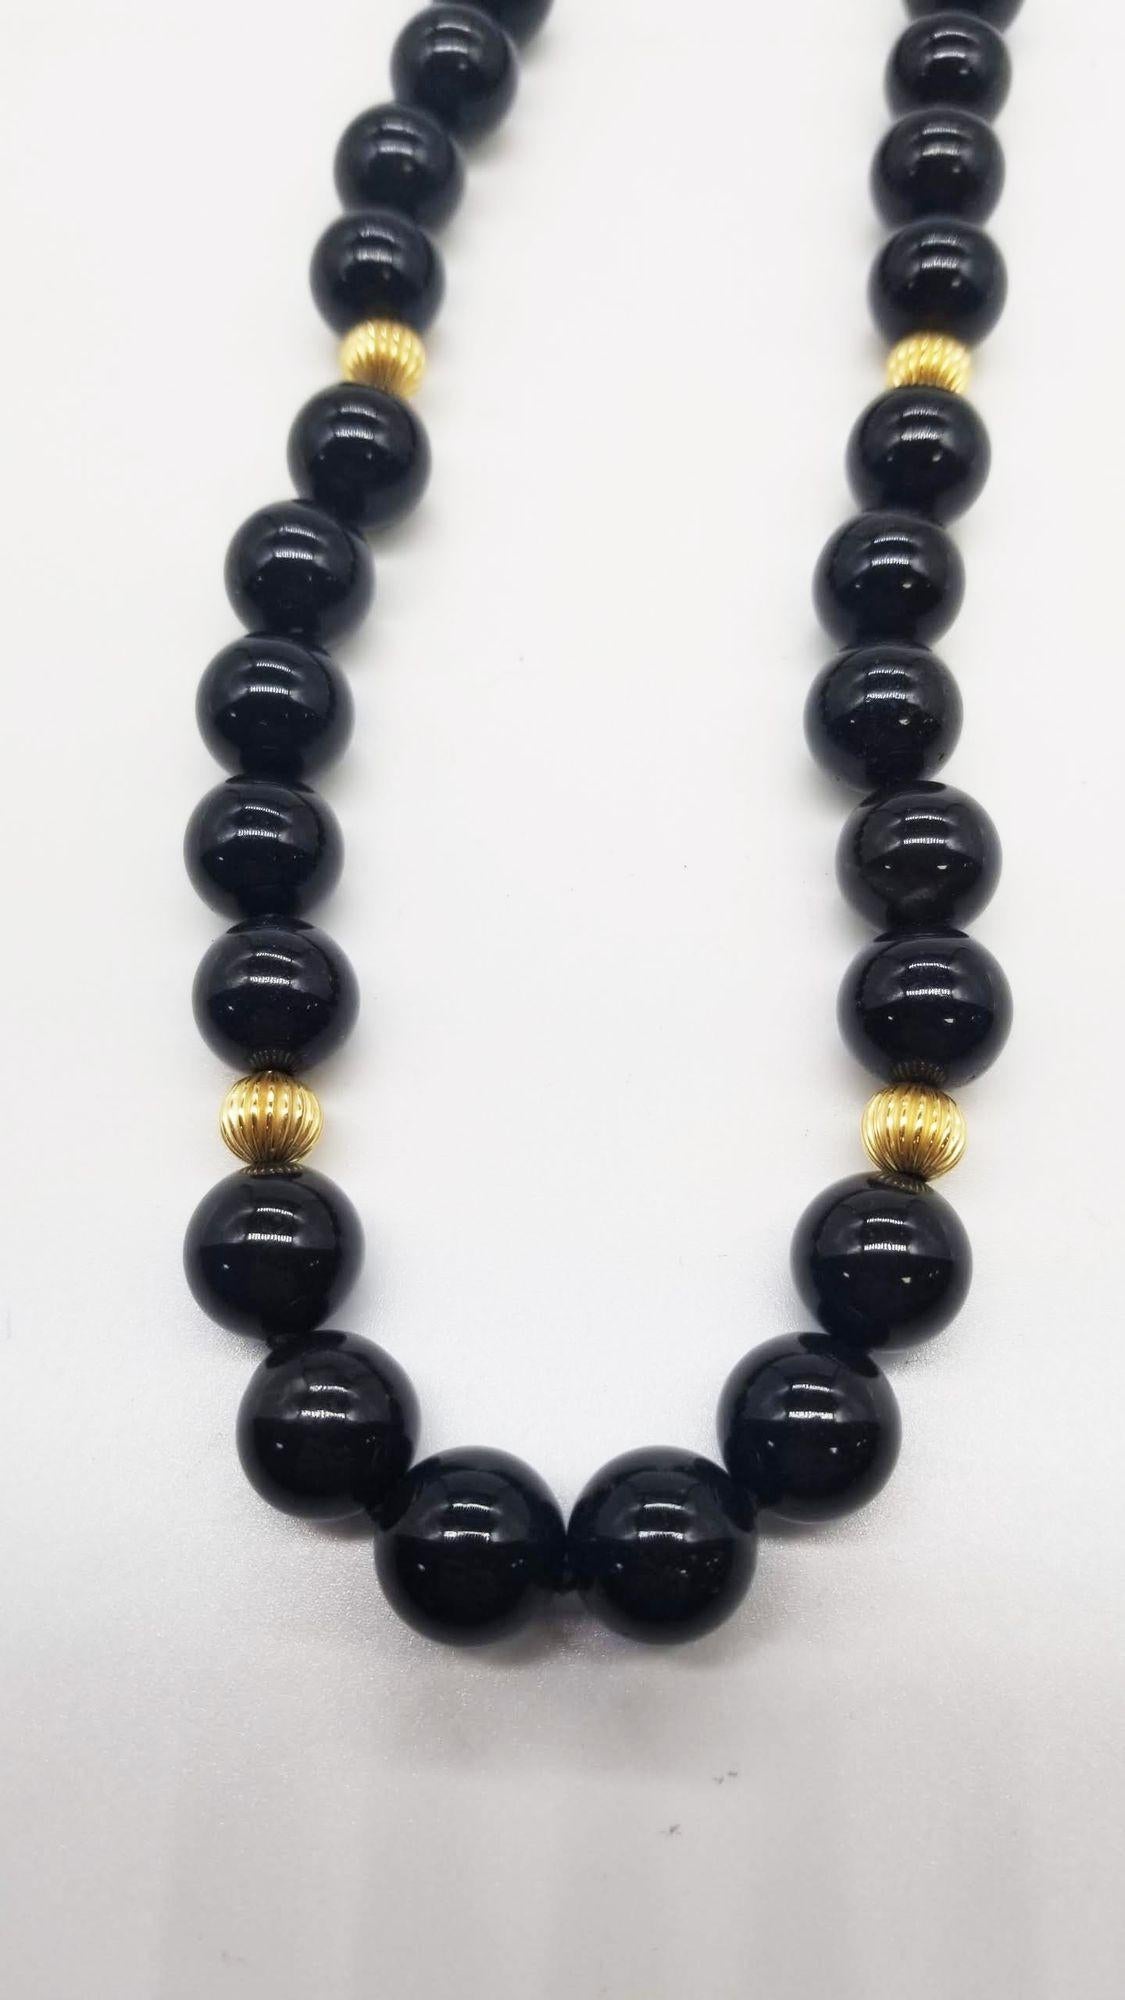 Crafted in the mid-century era, this obsidian and gold beaded necklace exudes timeless elegance. Its sleek, jet-black obsidian stones, meticulously strung together, create a sophisticated accessory. The piece encapsulates the era's allure, blending